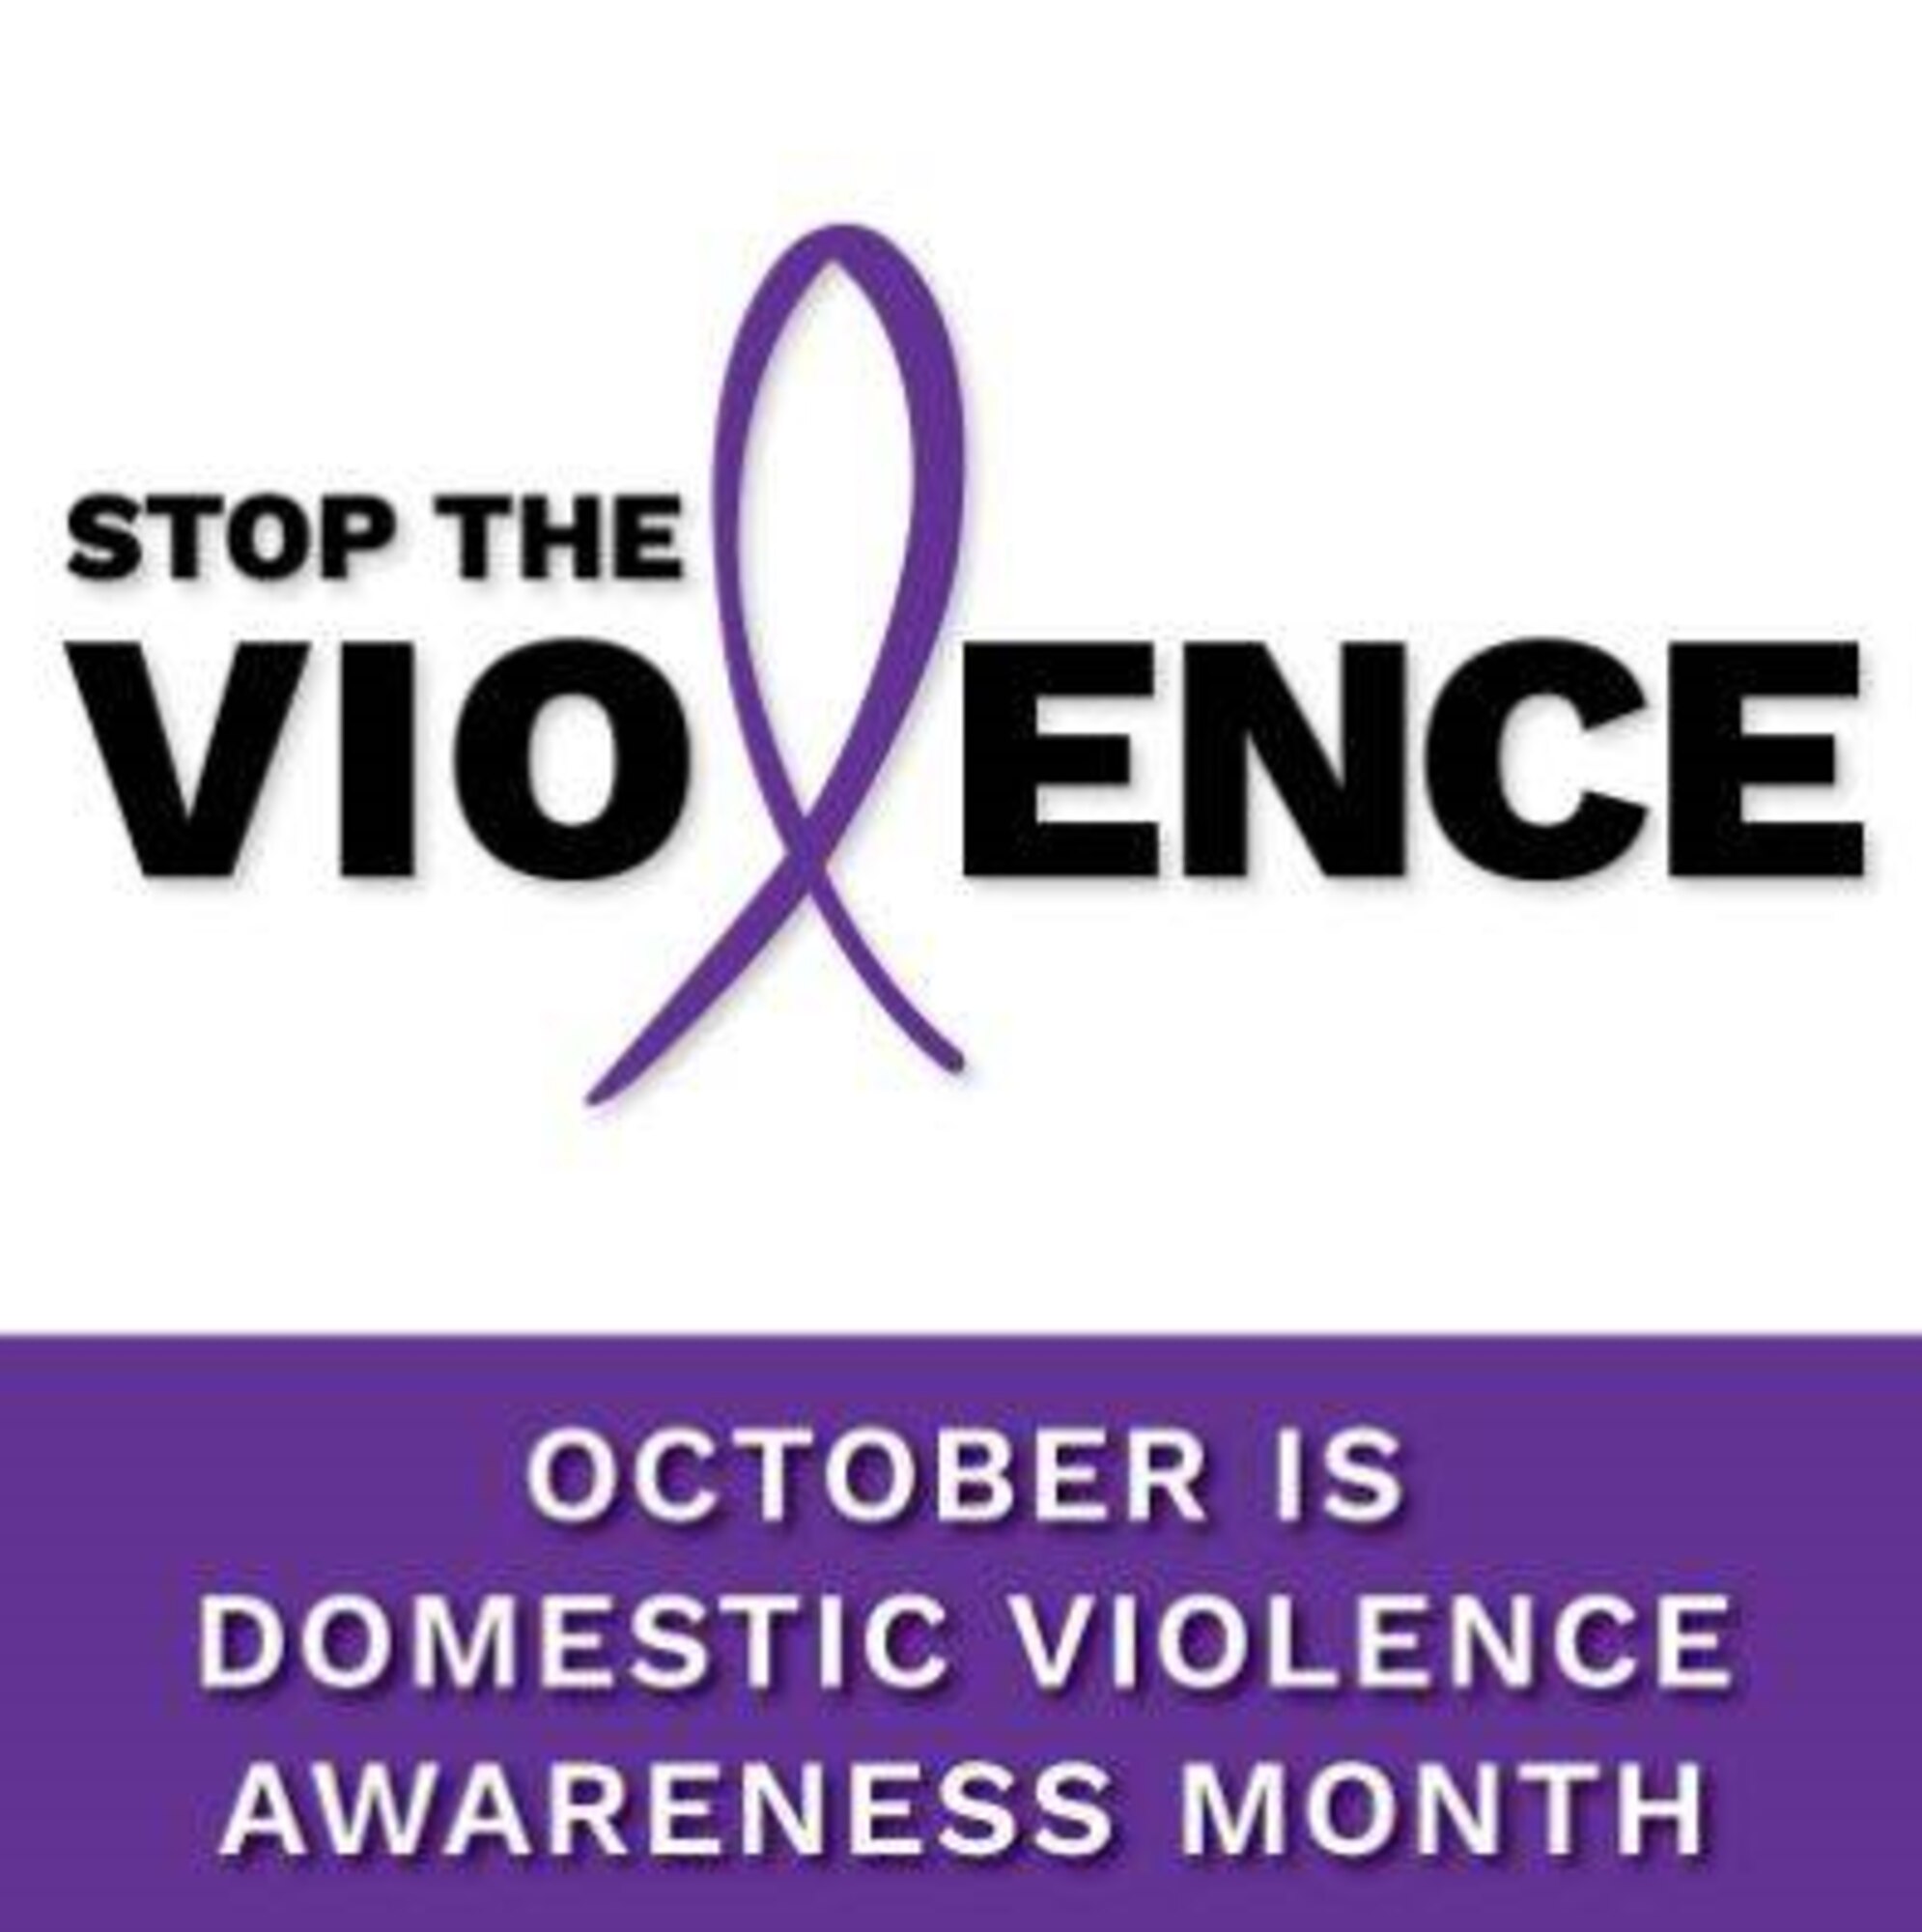 On average, nearly 20 people per minute are physically abused by an intimate partner in the United States. During one year, this equates to more than 10 million women and men. (Courtesy graphic)